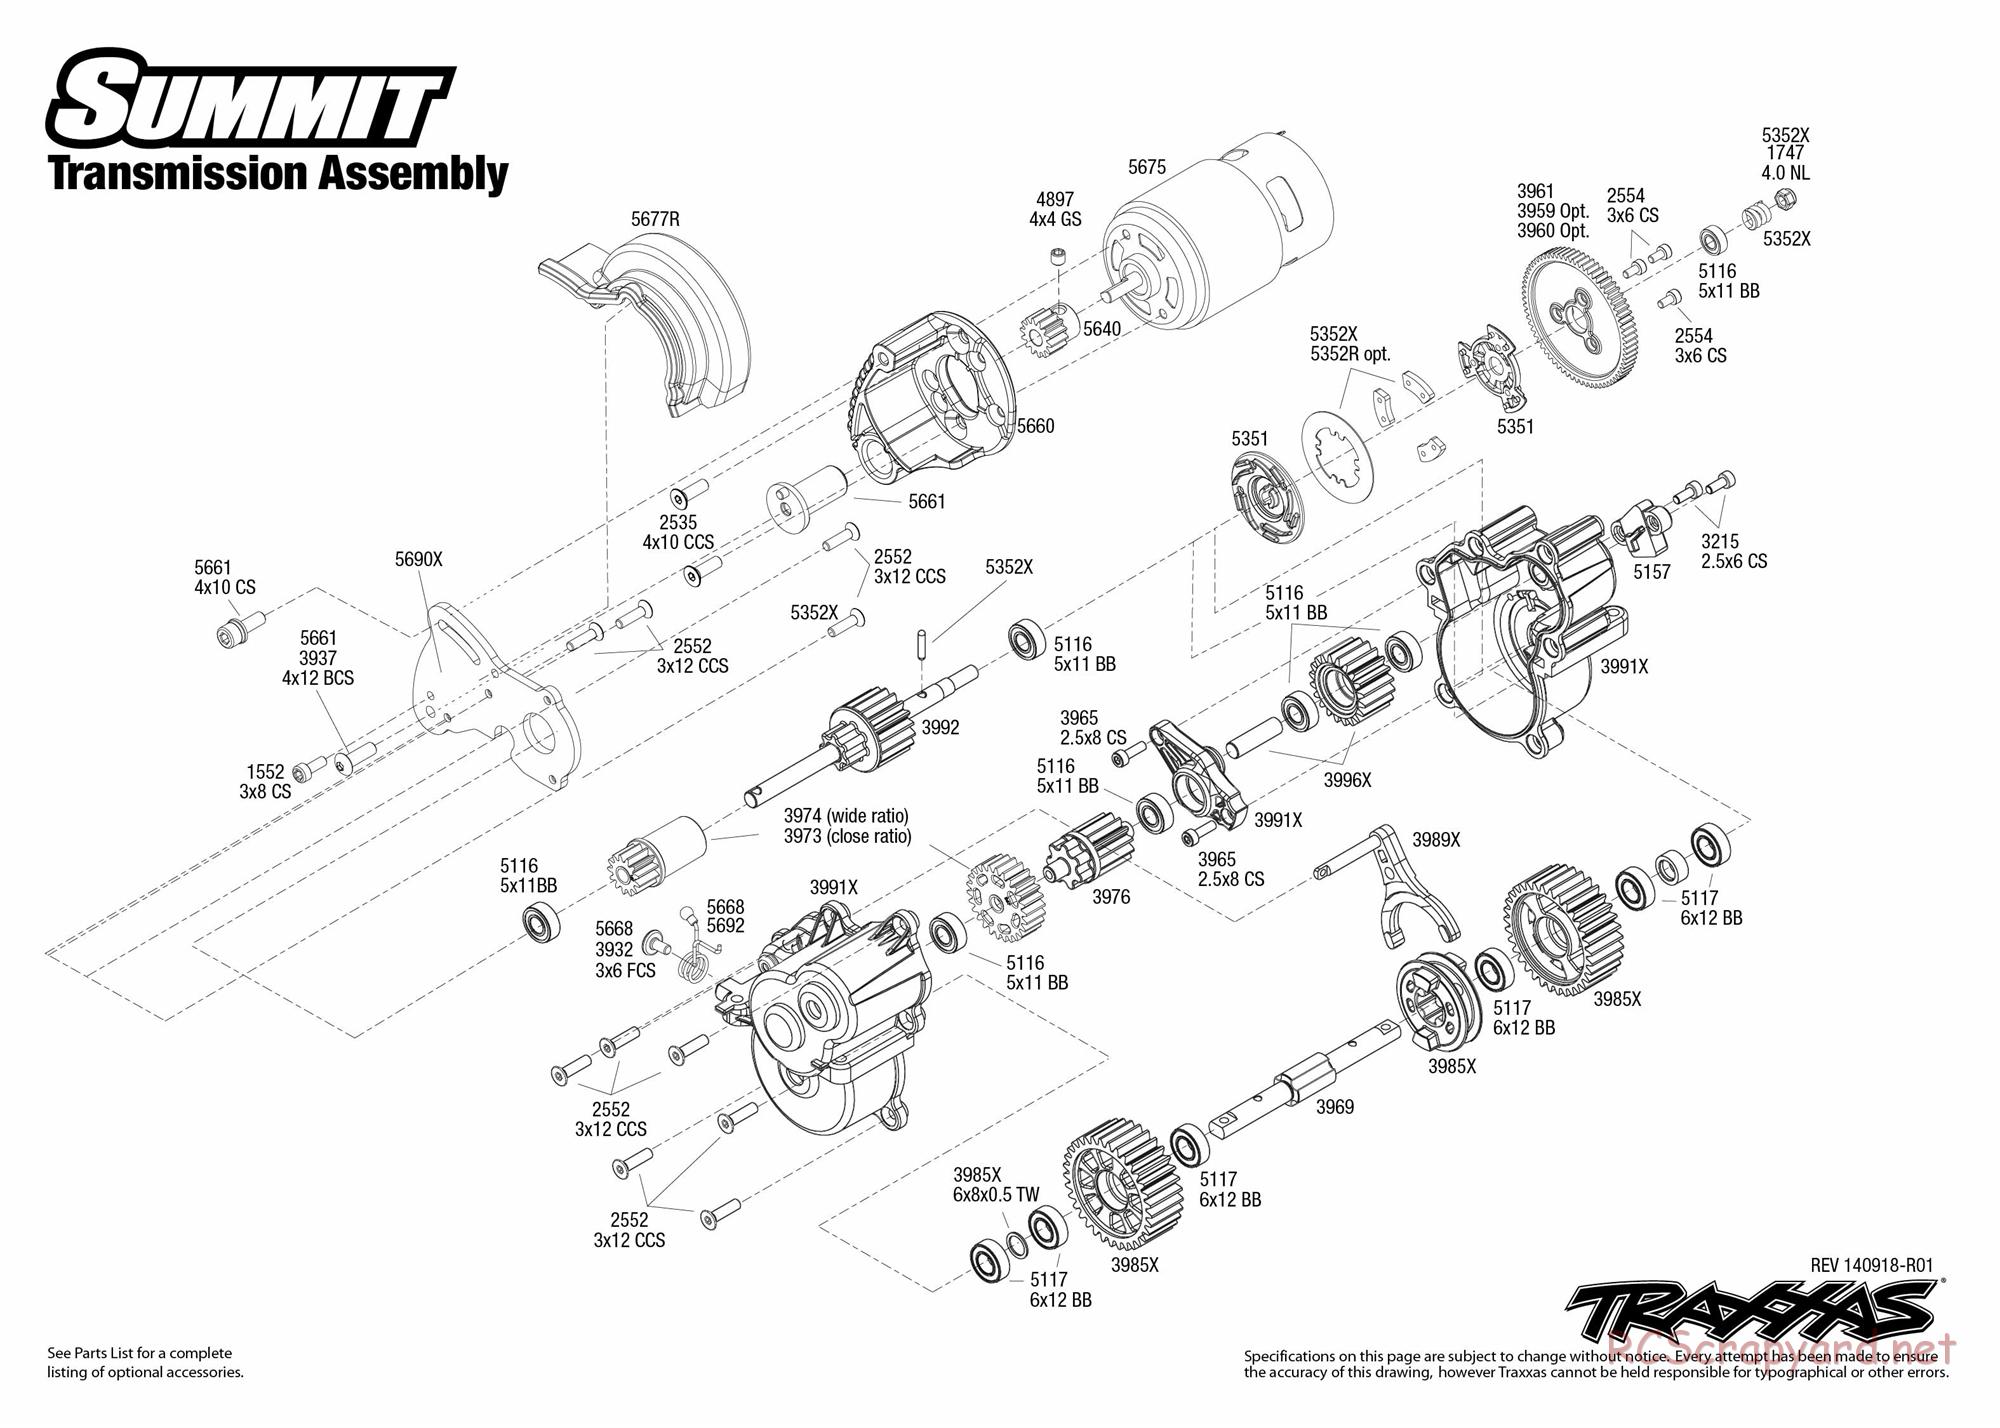 Traxxas - Summit (2014) - Exploded Views - Page 4